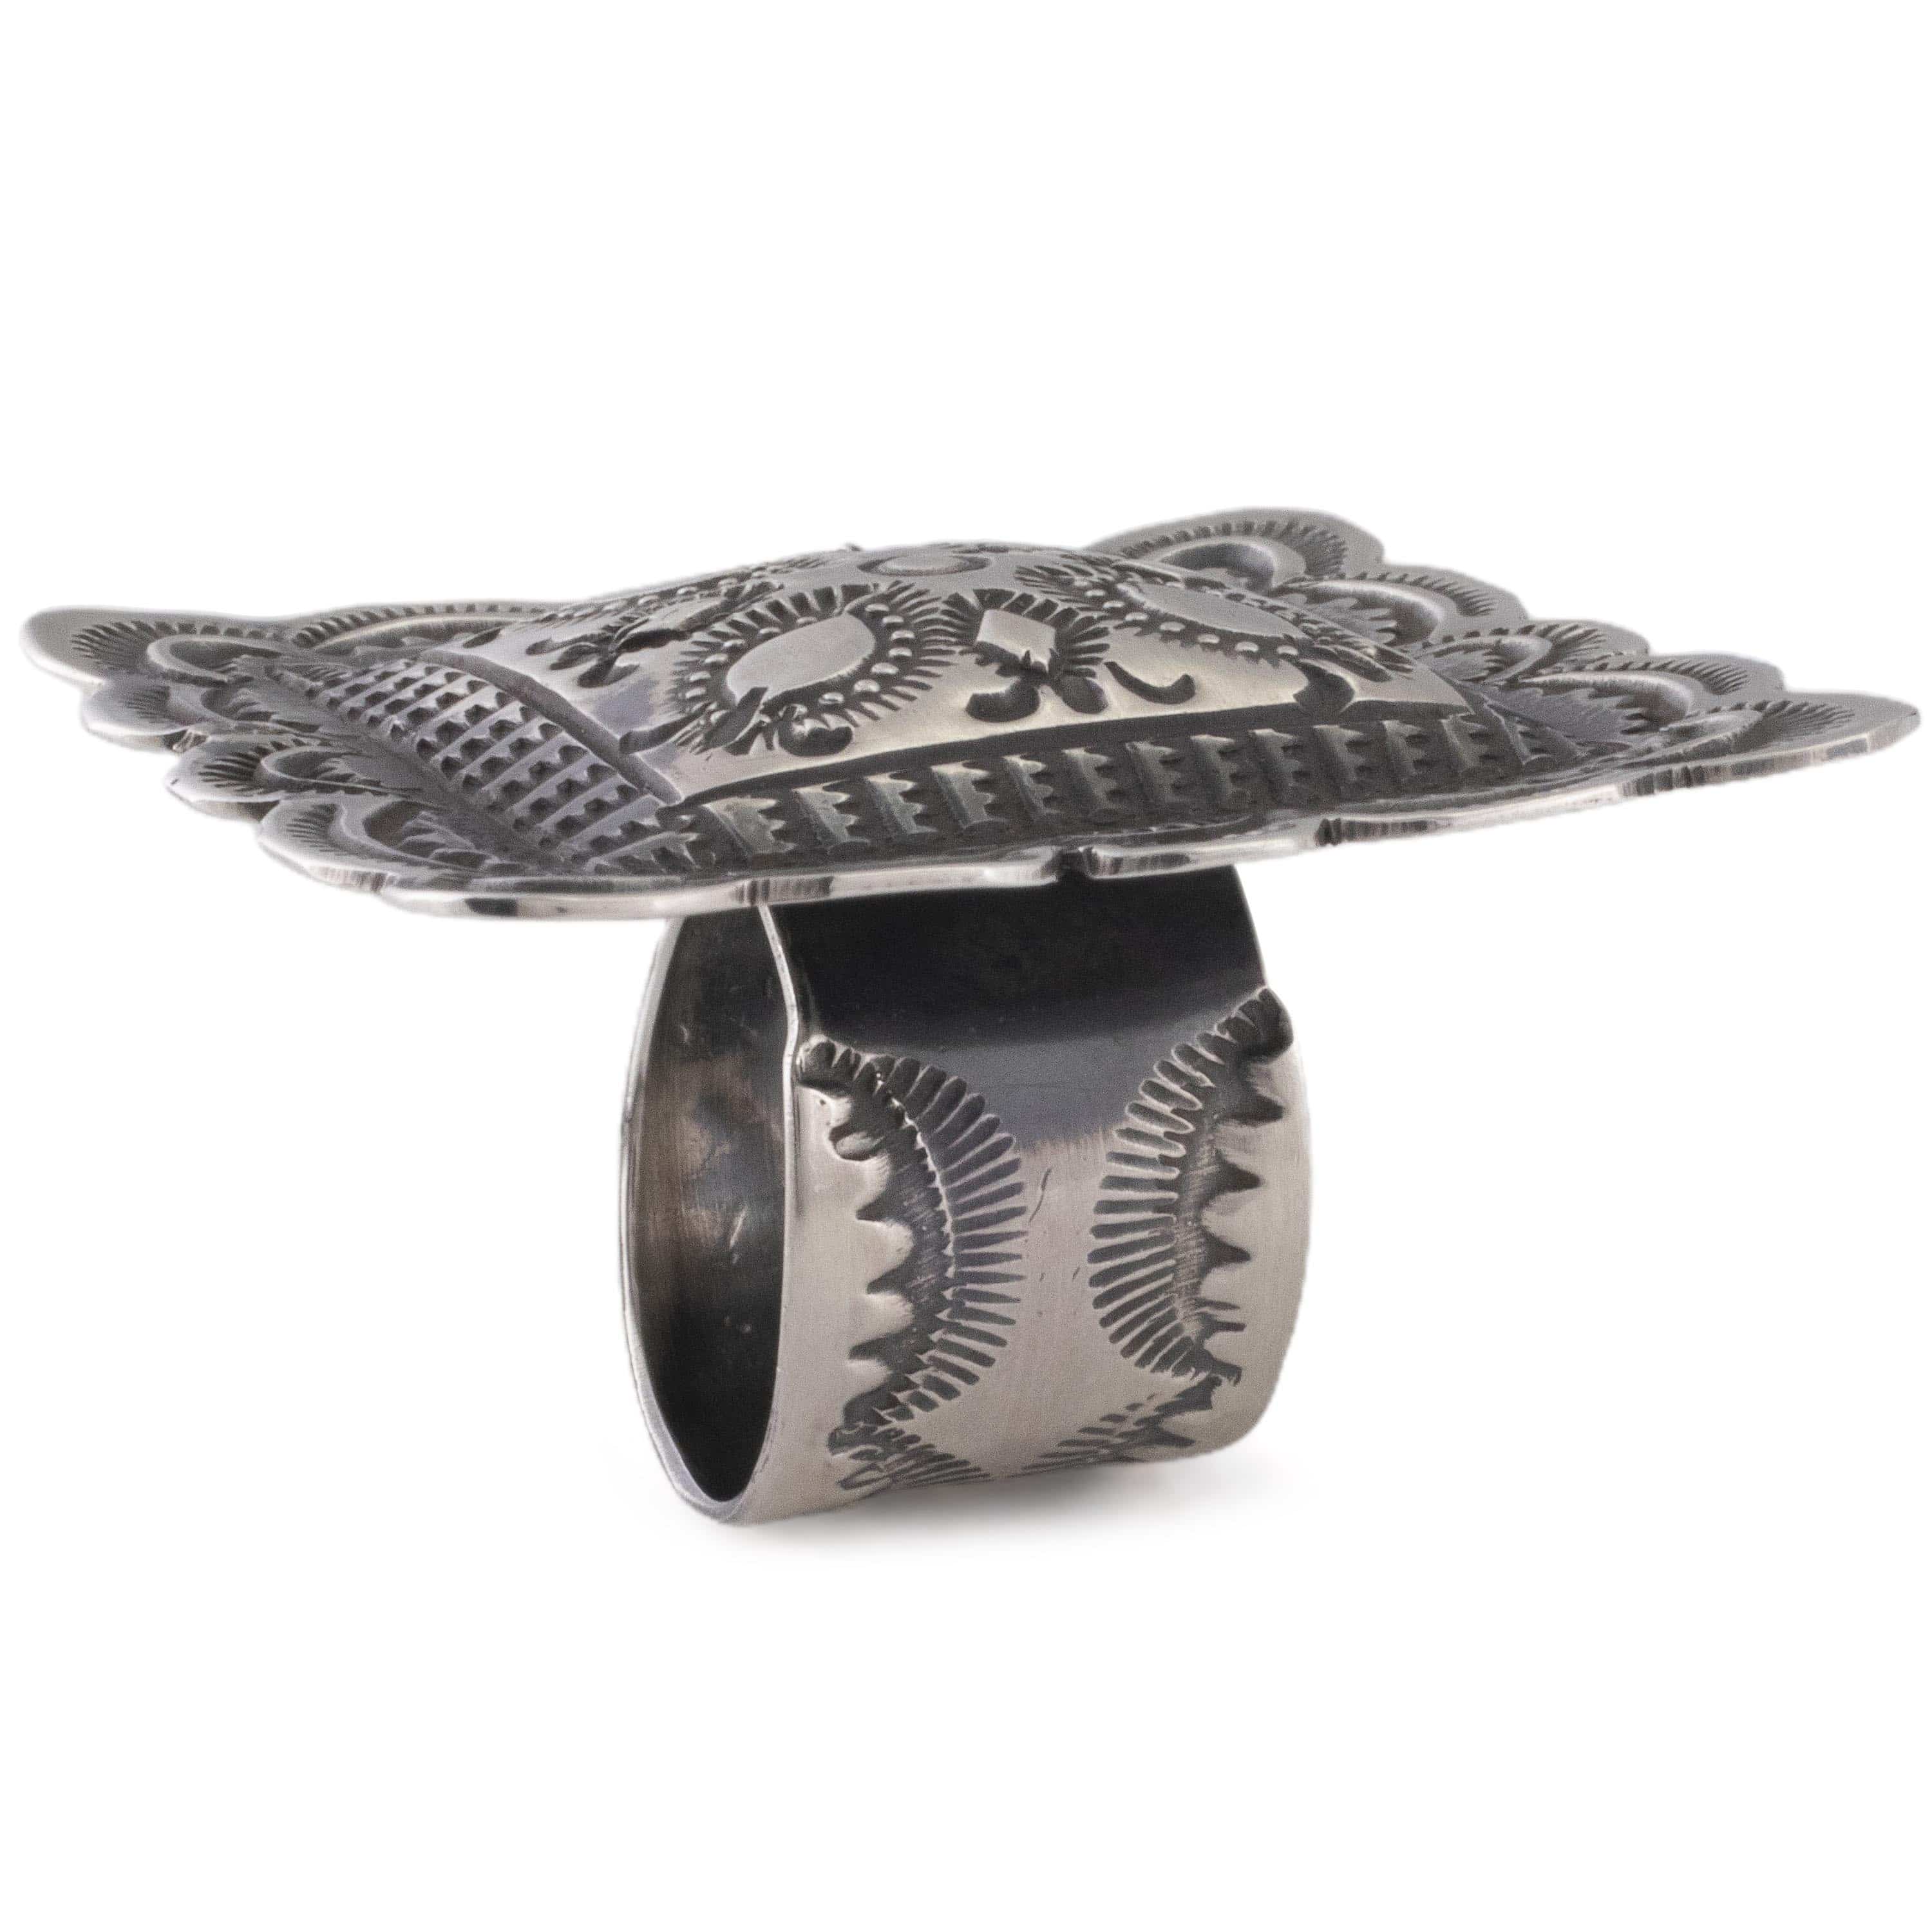 Kalifano Native American Jewelry ADJUSTABLE Vincent Platero Navajo Adjustable USA Native American Made 925 Sterling Silver Ring NAR700.025.ADJ